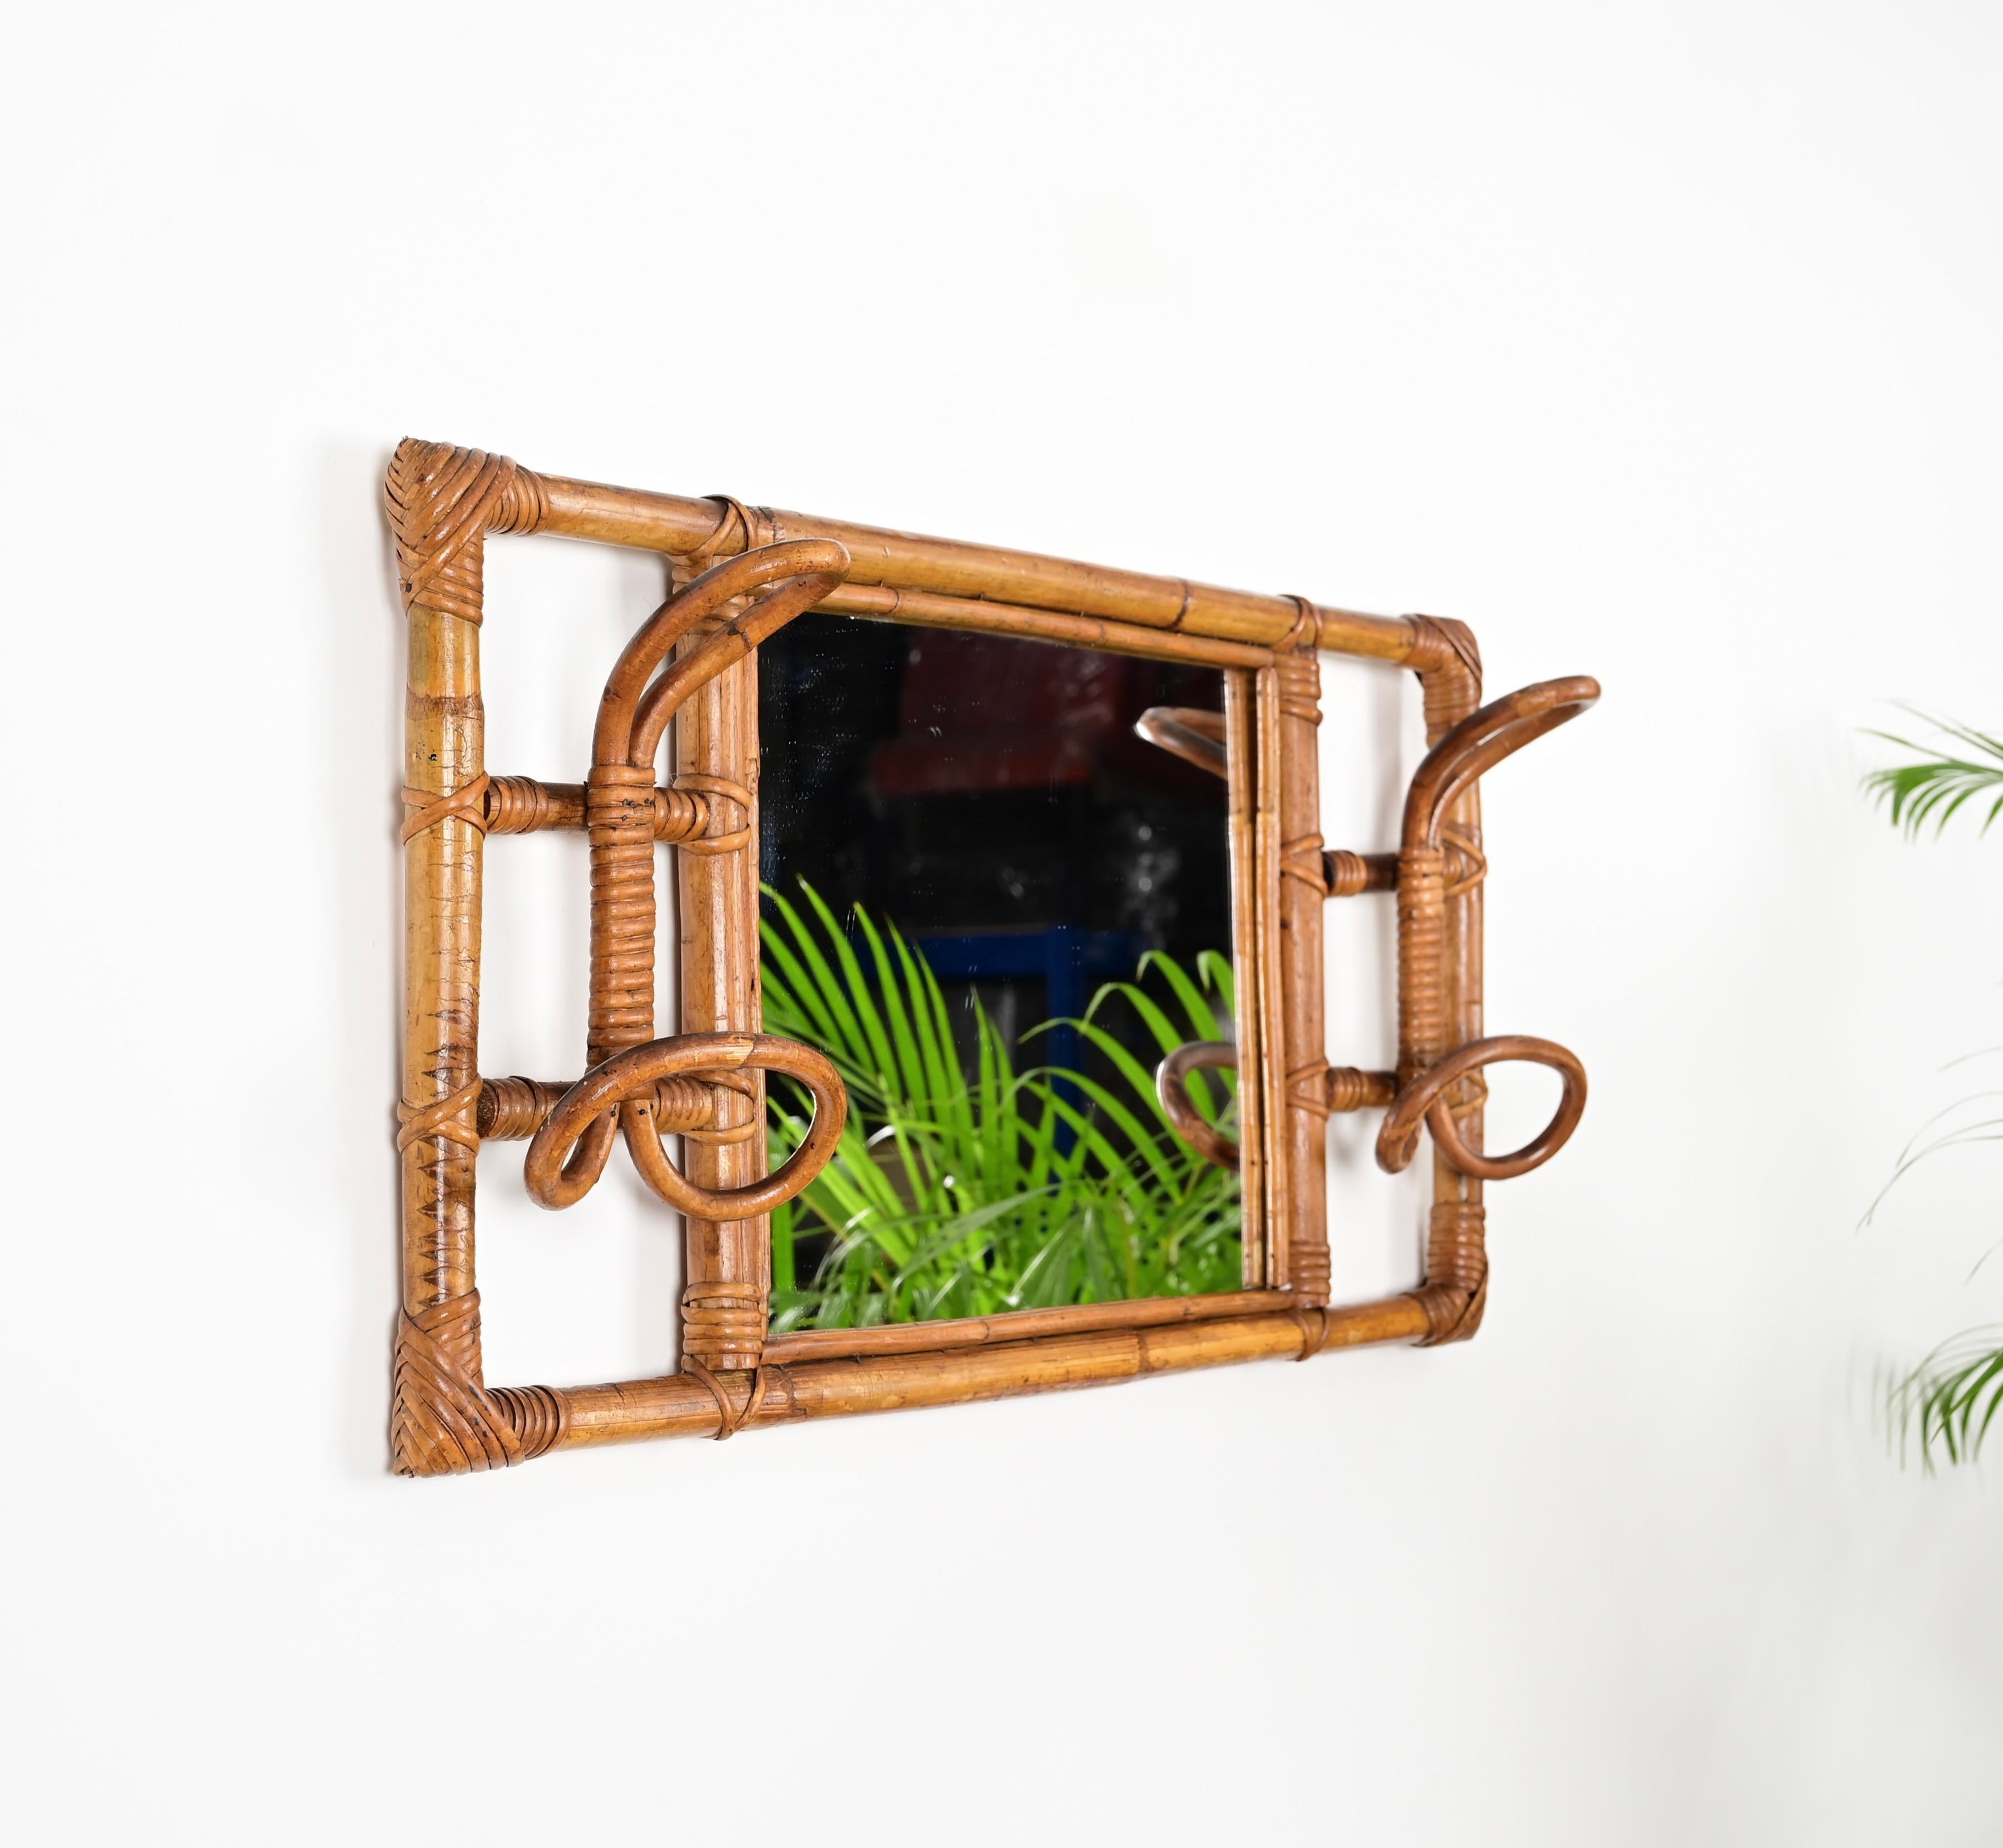 Beautiful Côte d'Azur style rectangular wall mirror with two side coat hooks in curved rattan, bamboo and hand-woven wicker. This lovely mirror was produced in Italy during the 1960s.

This unique mirror features a rectangular frame in bamboo with a